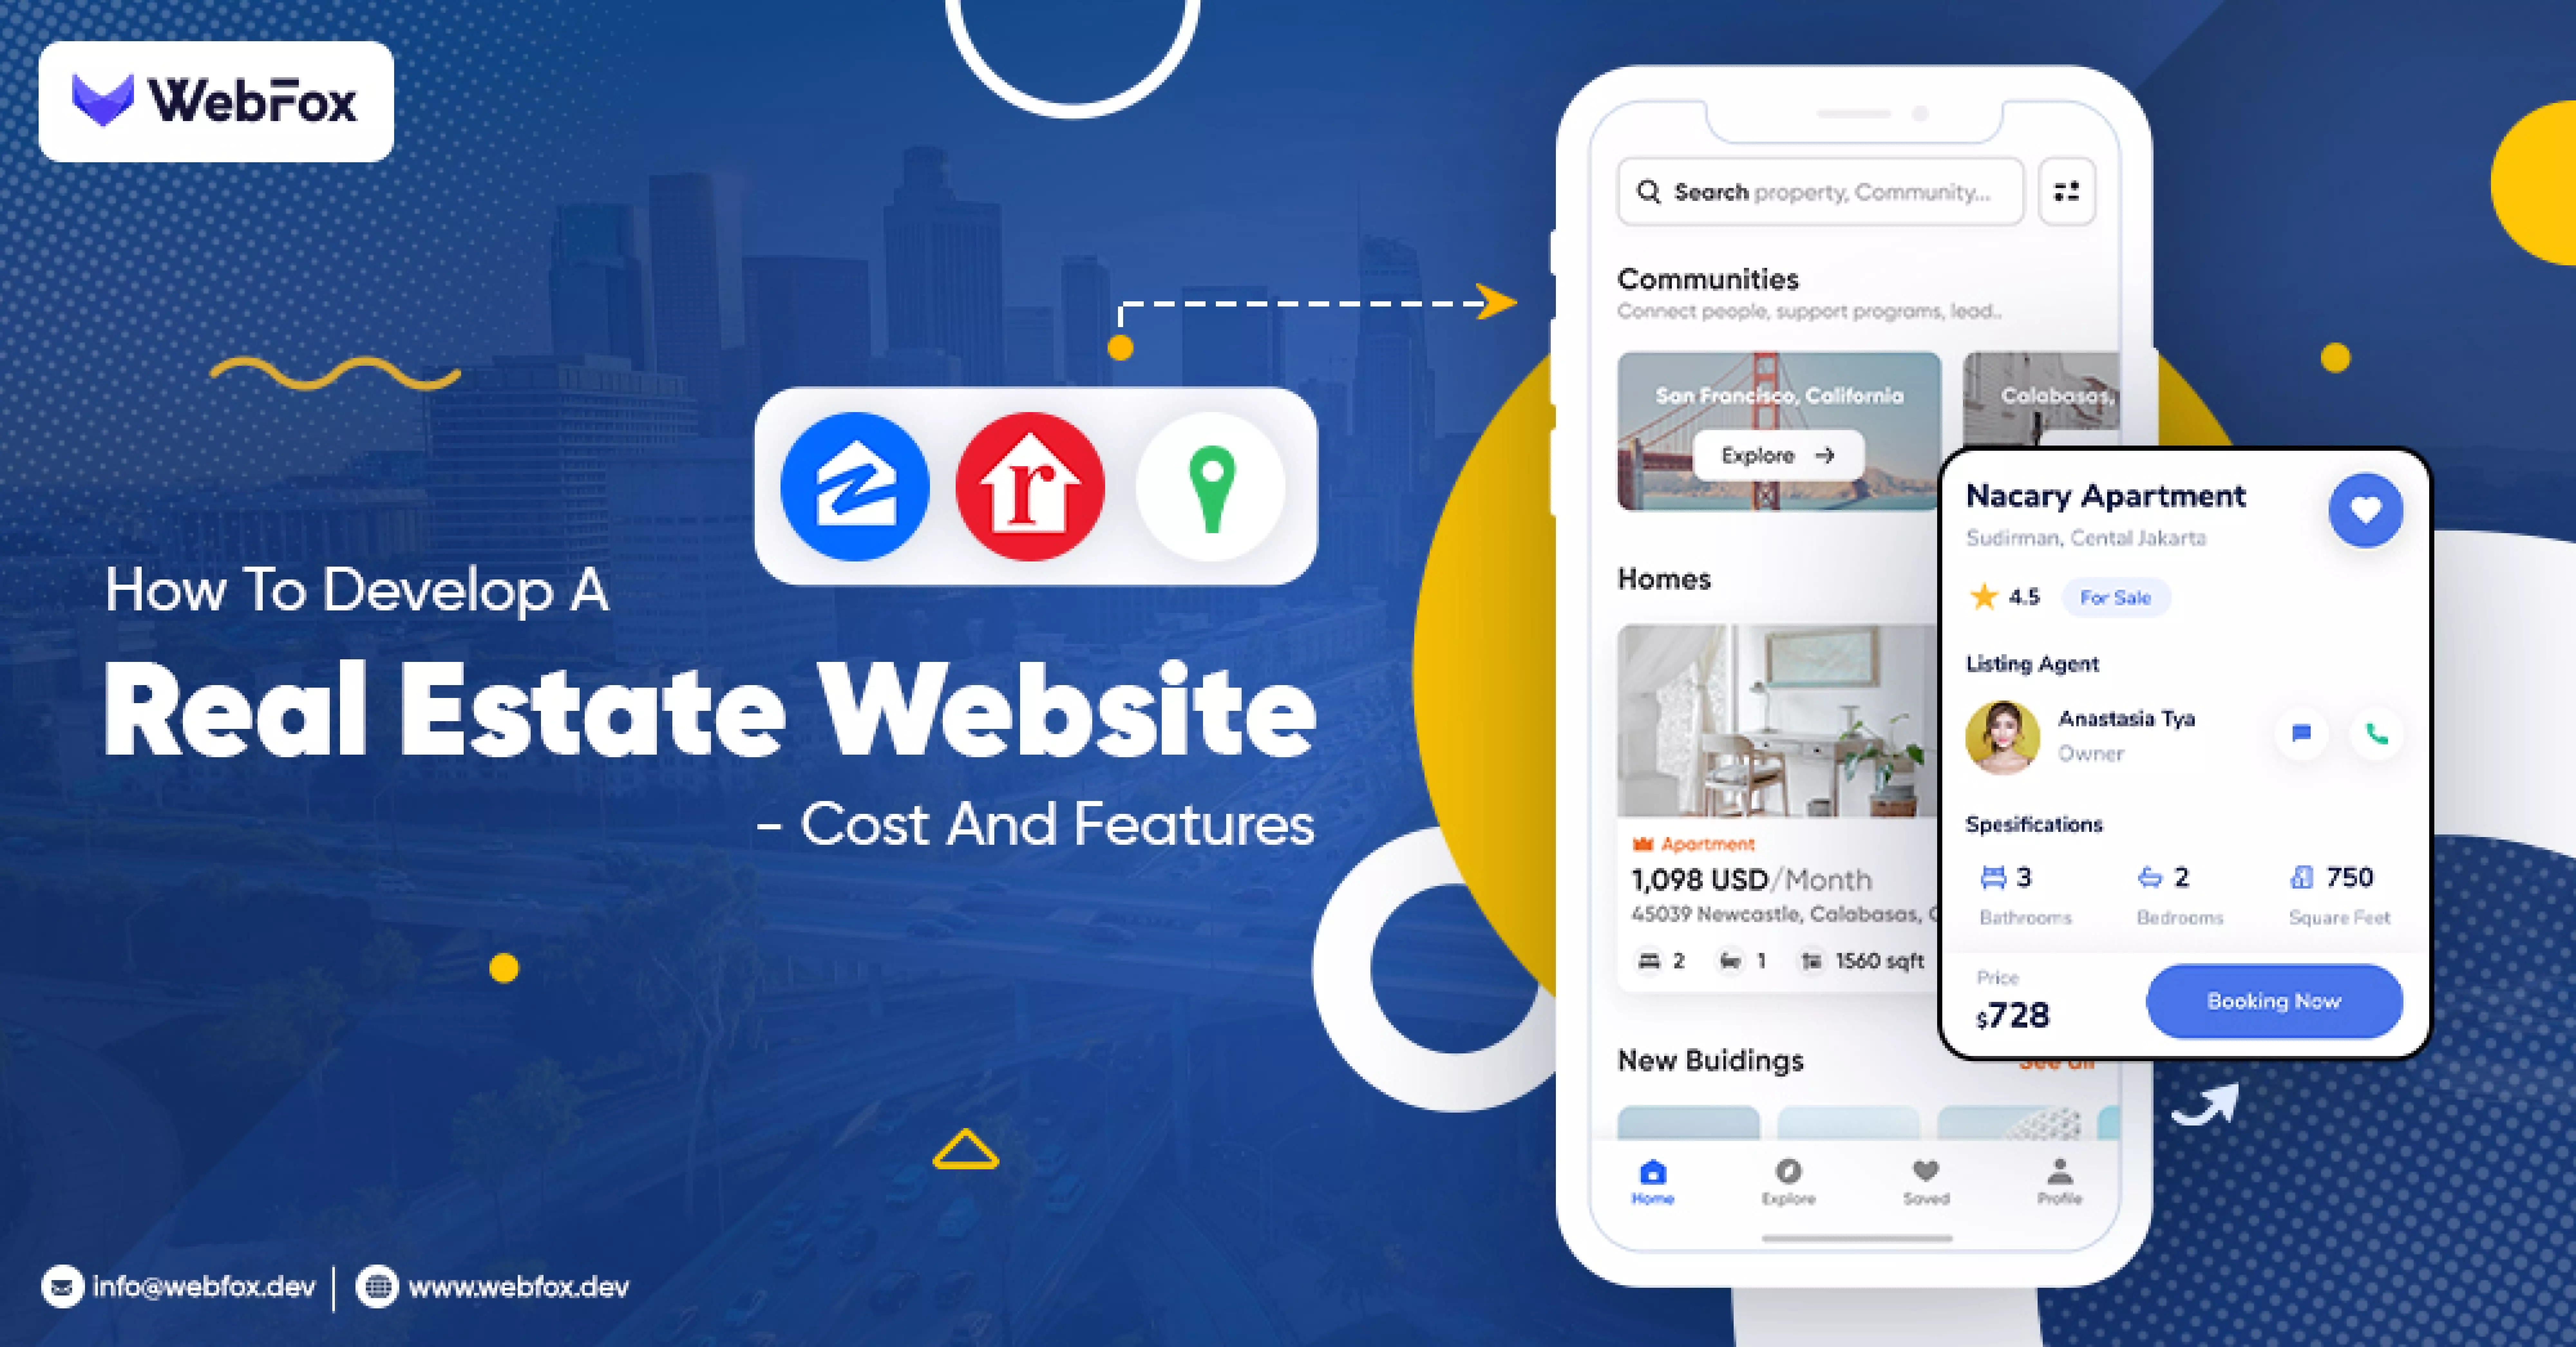 How to develop a real estate website - Cost and Features